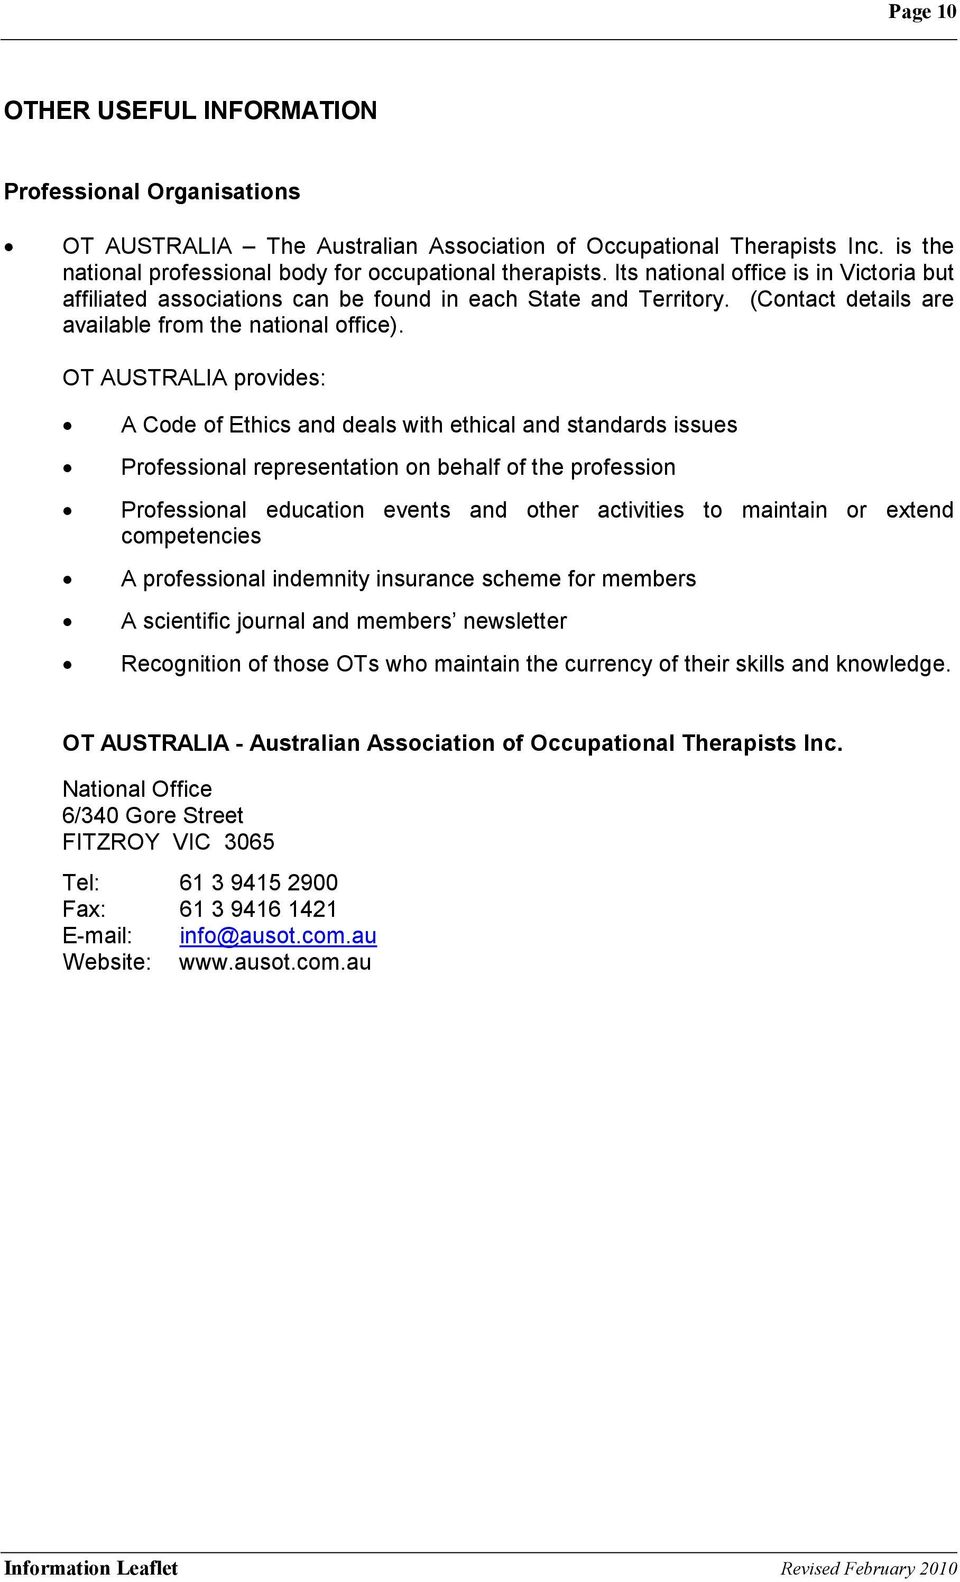 OT AUSTRALIA provides: A Code of Ethics and deals with ethical and standards issues Professional representation on behalf of the profession Professional education events and other activities to